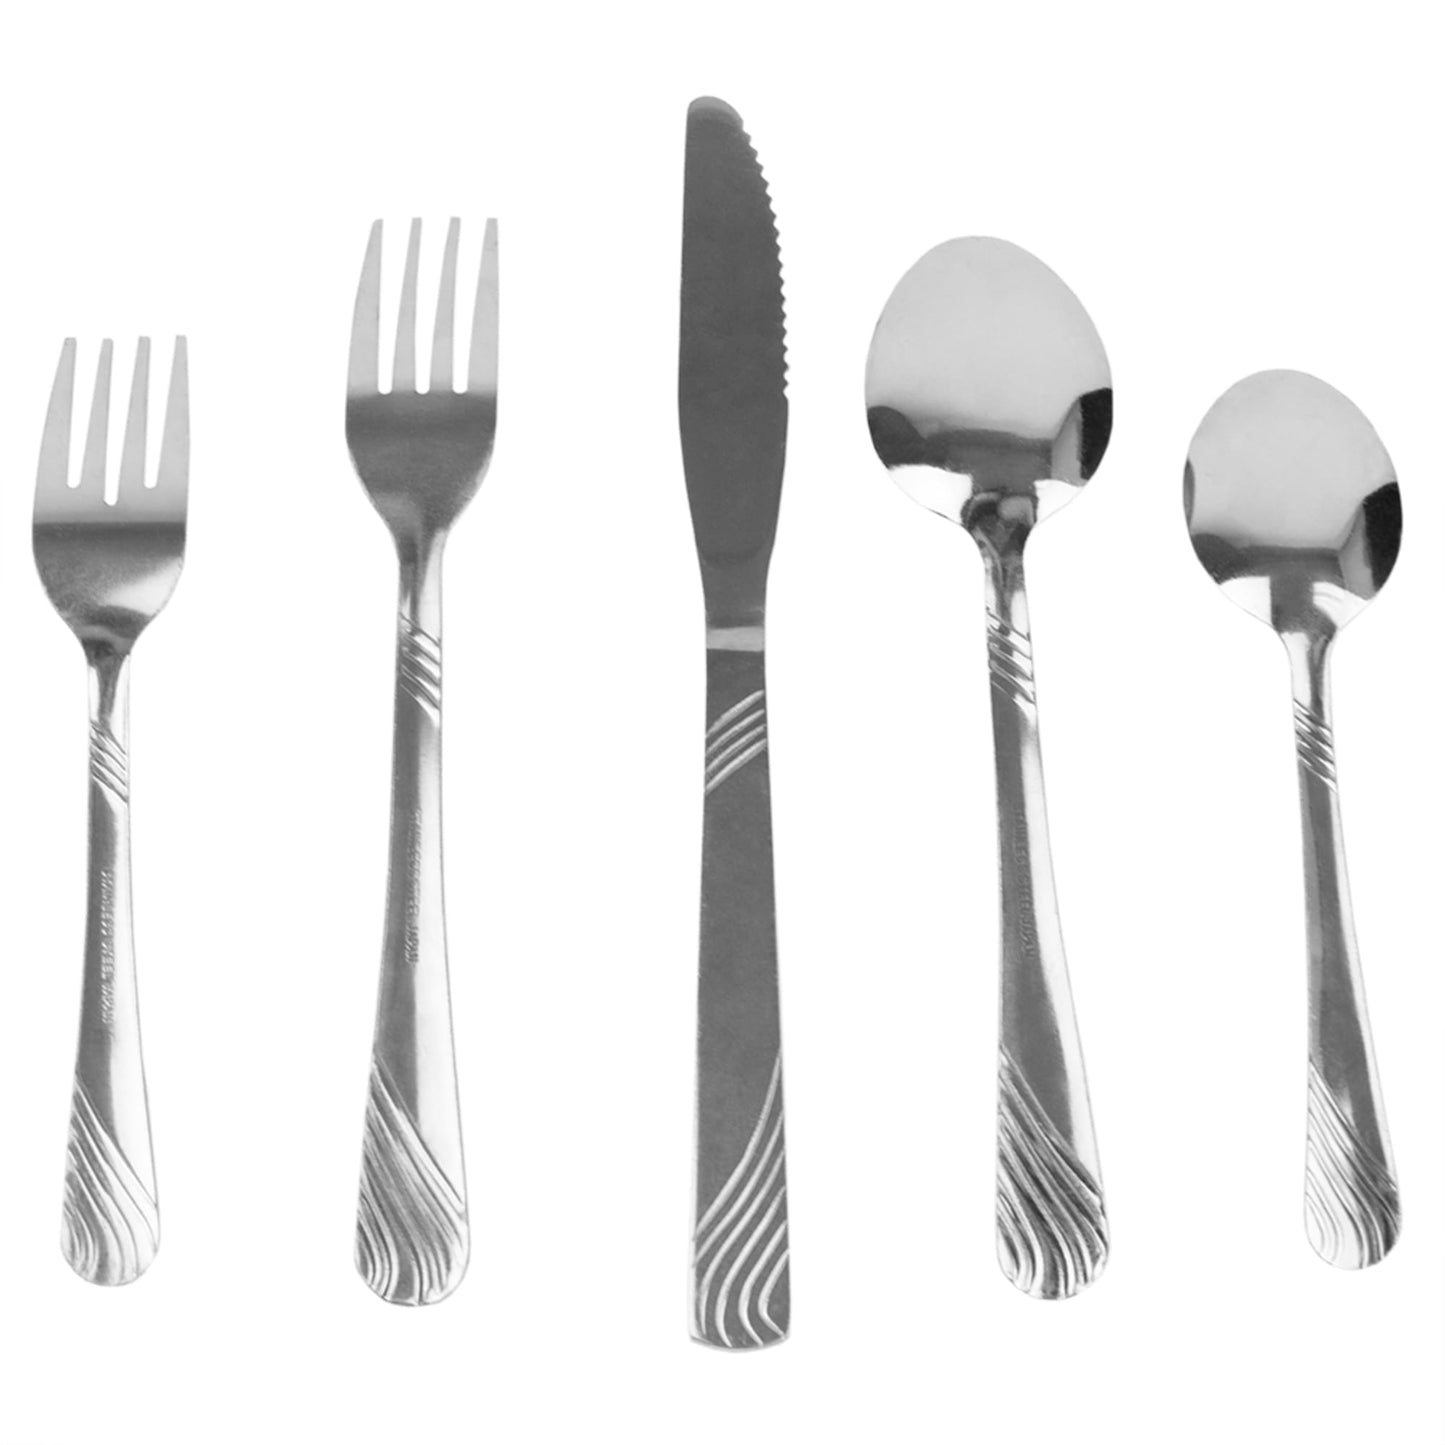 River 20 Piece Stainless Steel Flatware Set, Silver